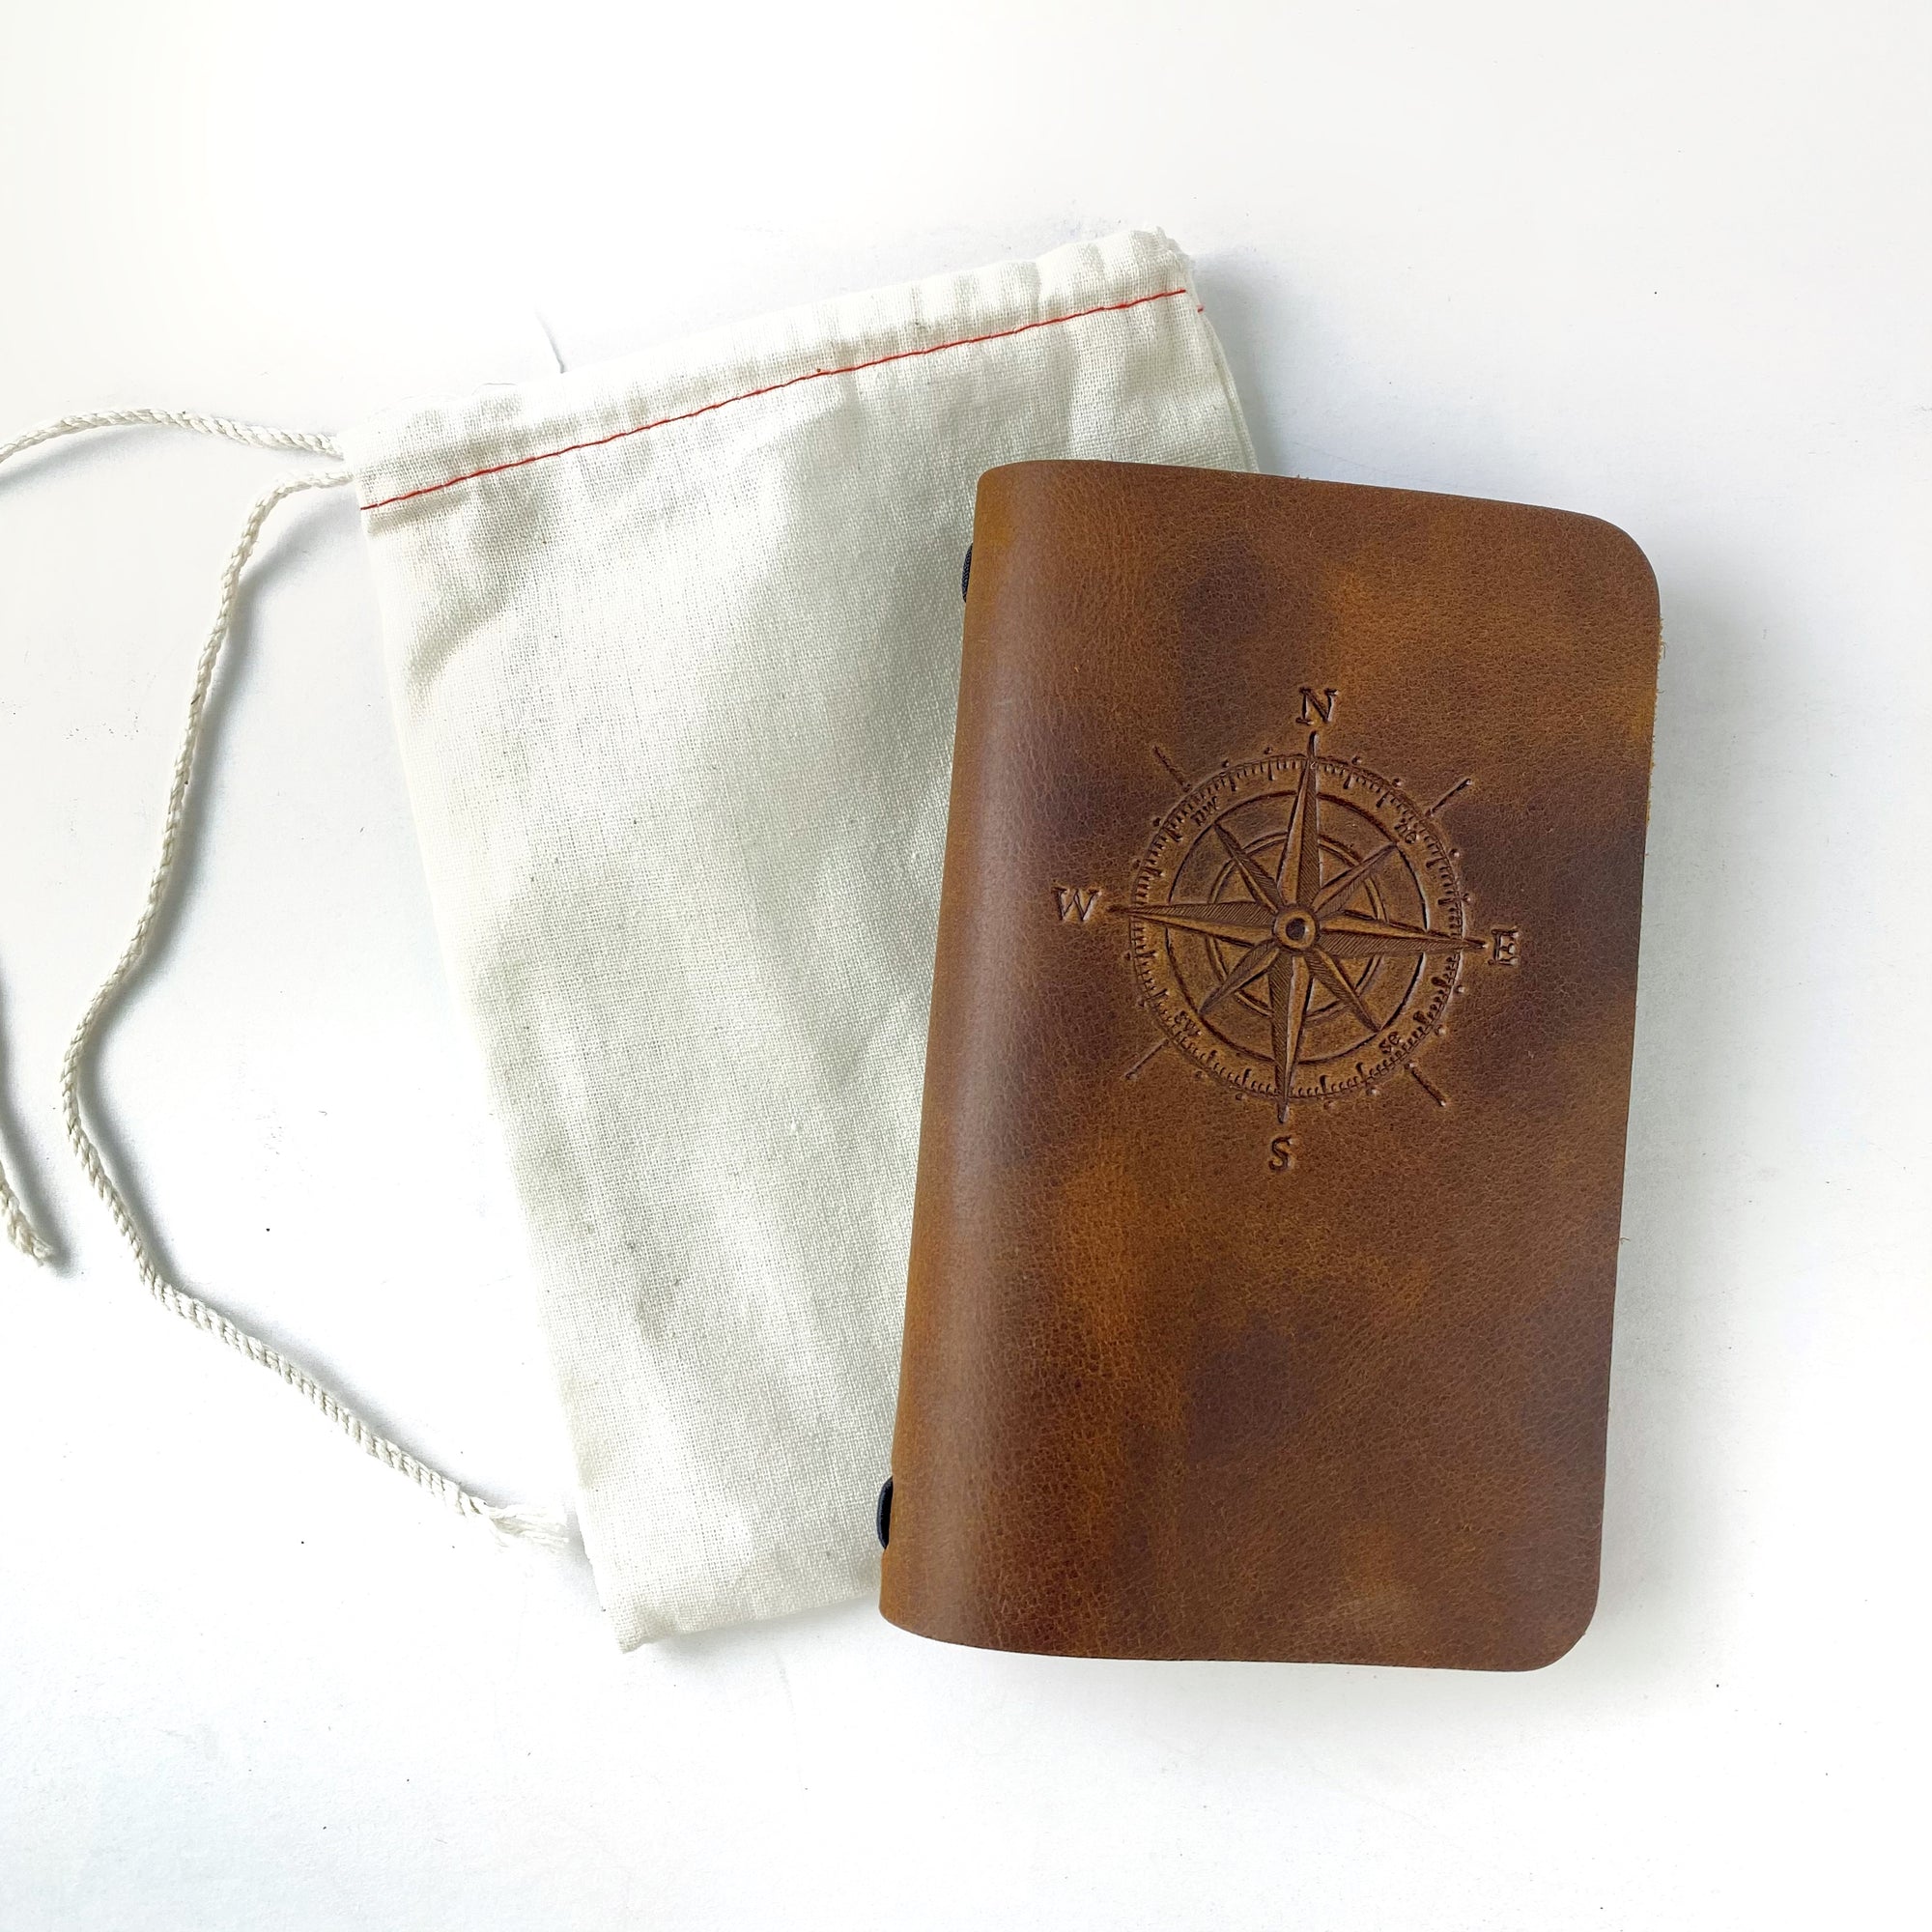 Leather journal with compass engraving alongside canvas pouch.